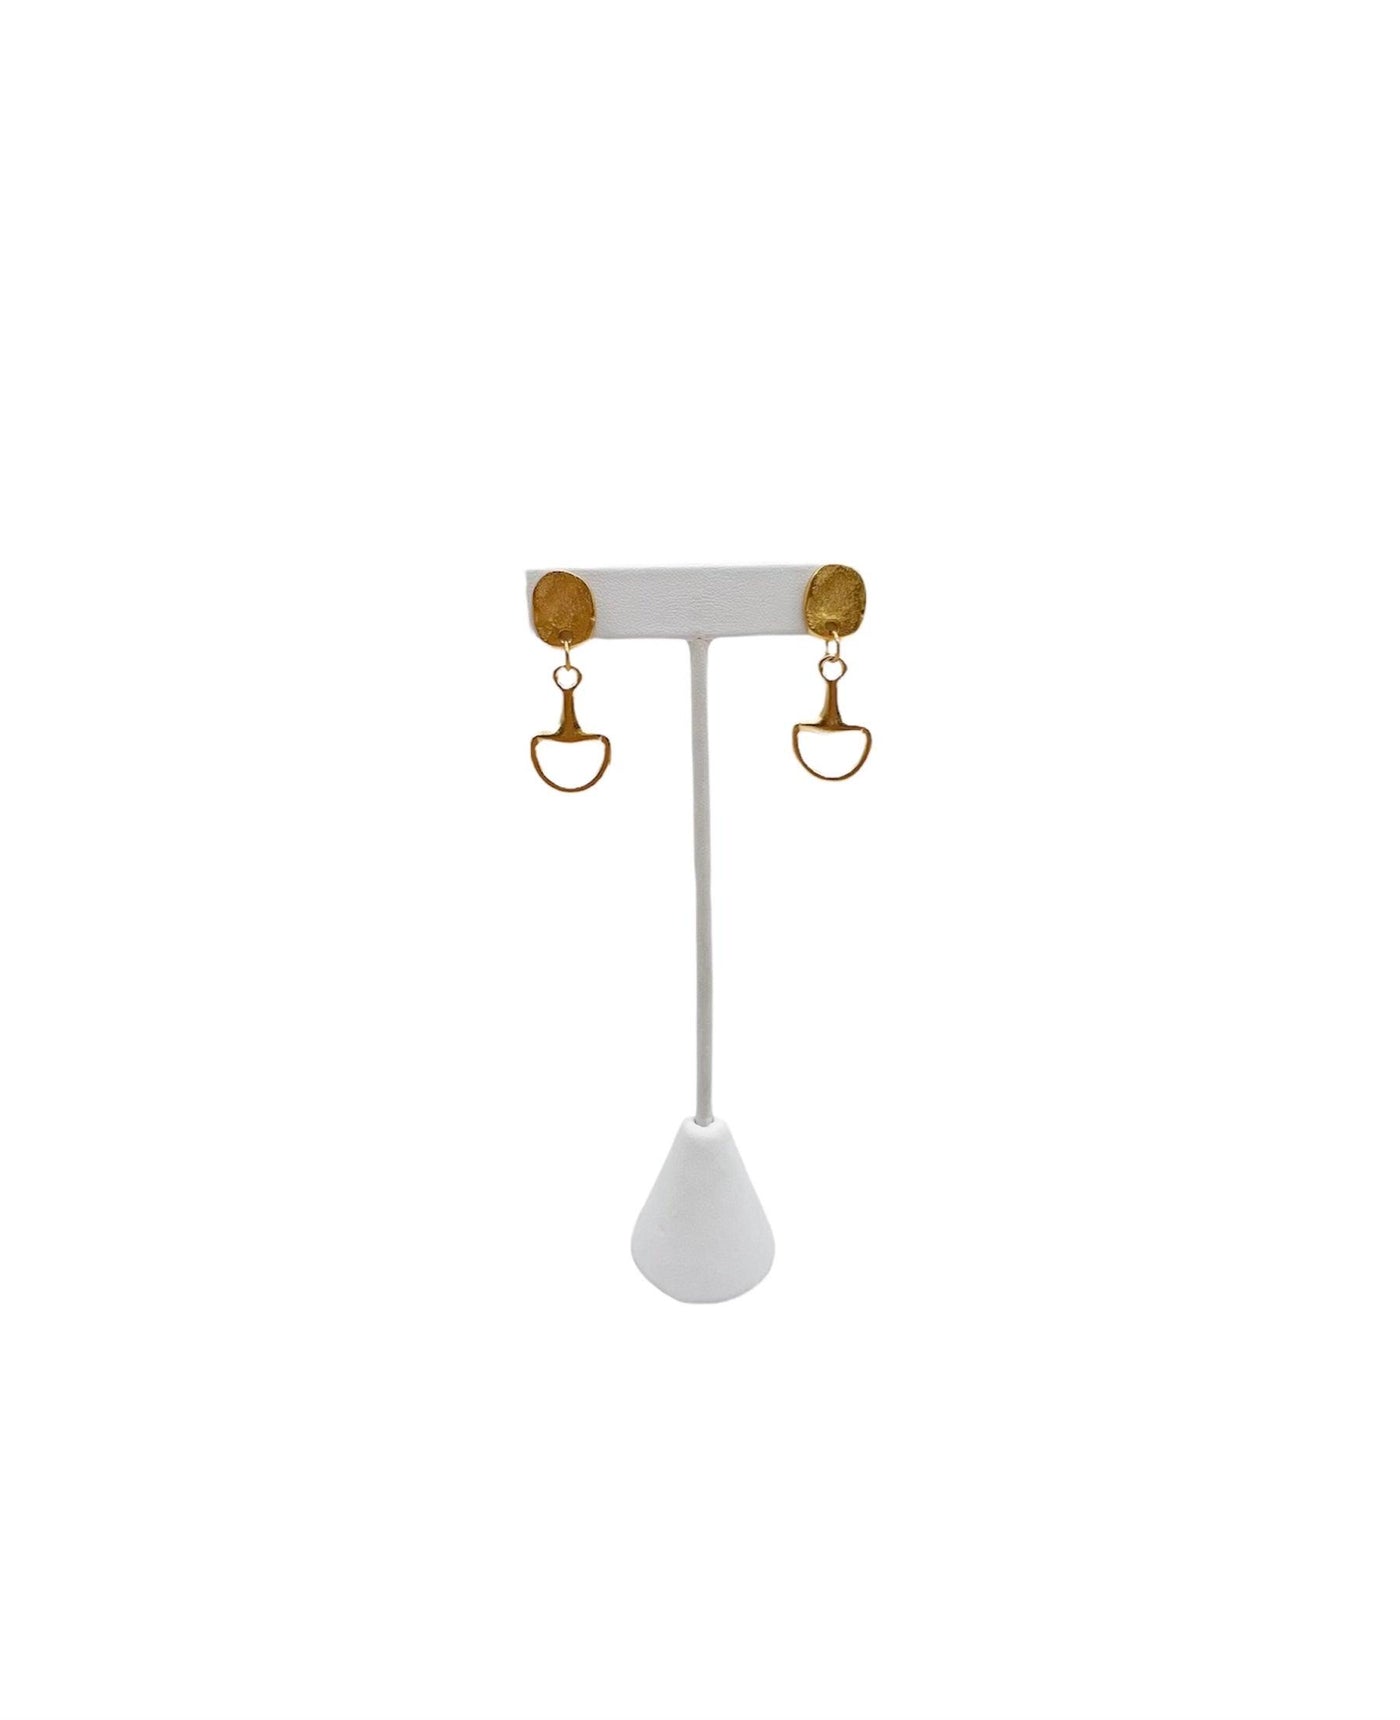 Gold stud and horse bit drop pendant earrings on a white earring stand